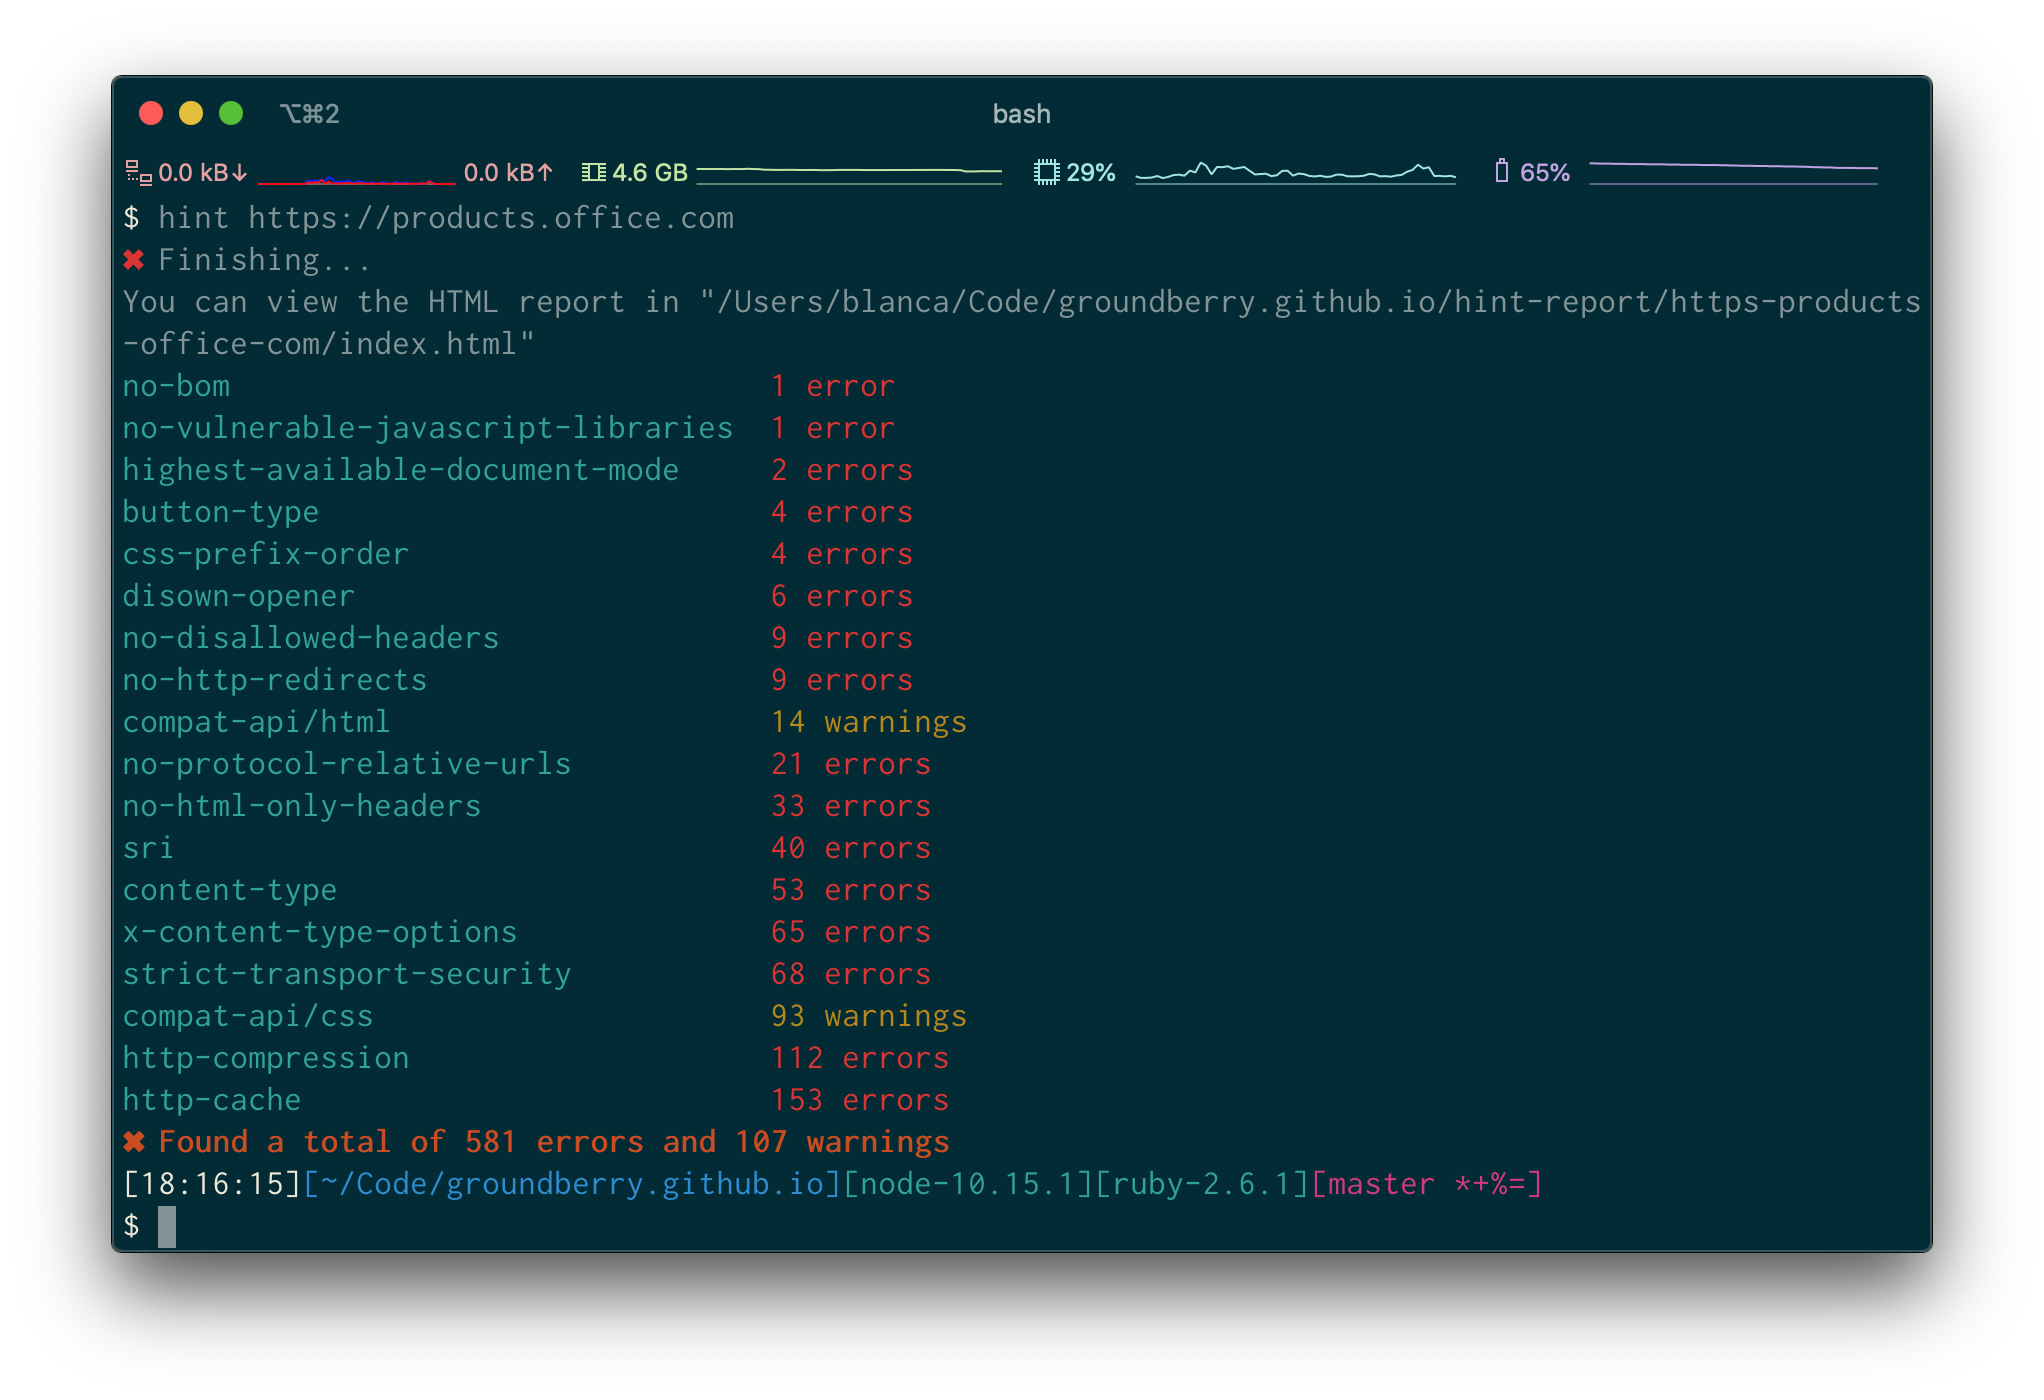 Running webhint from the terminal